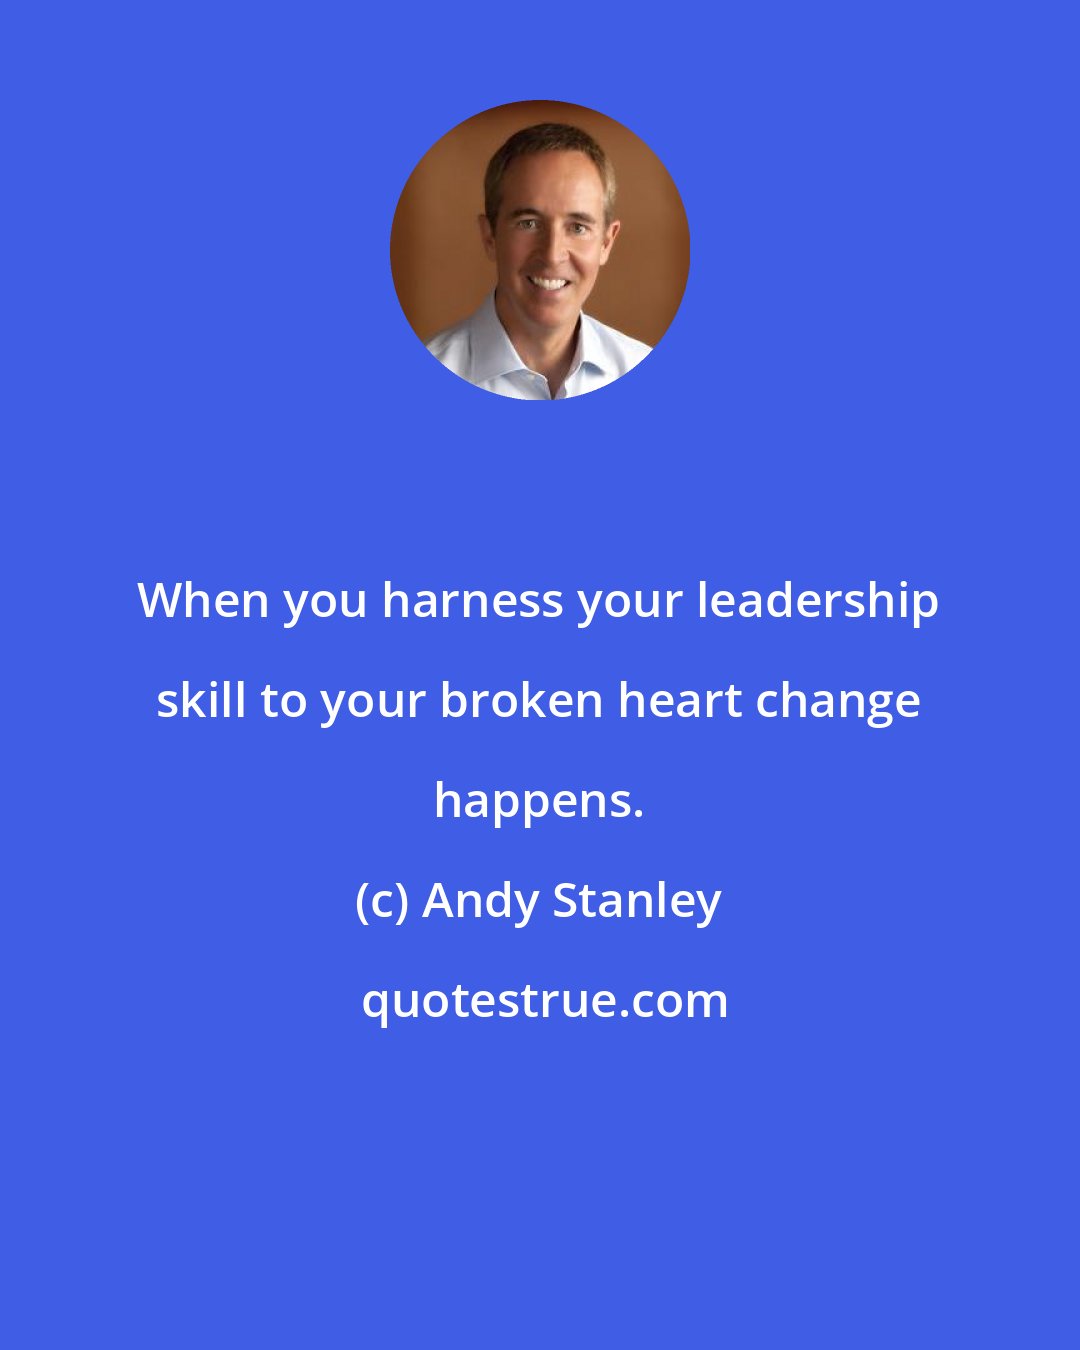 Andy Stanley: When you harness your leadership skill to your broken heart change happens.